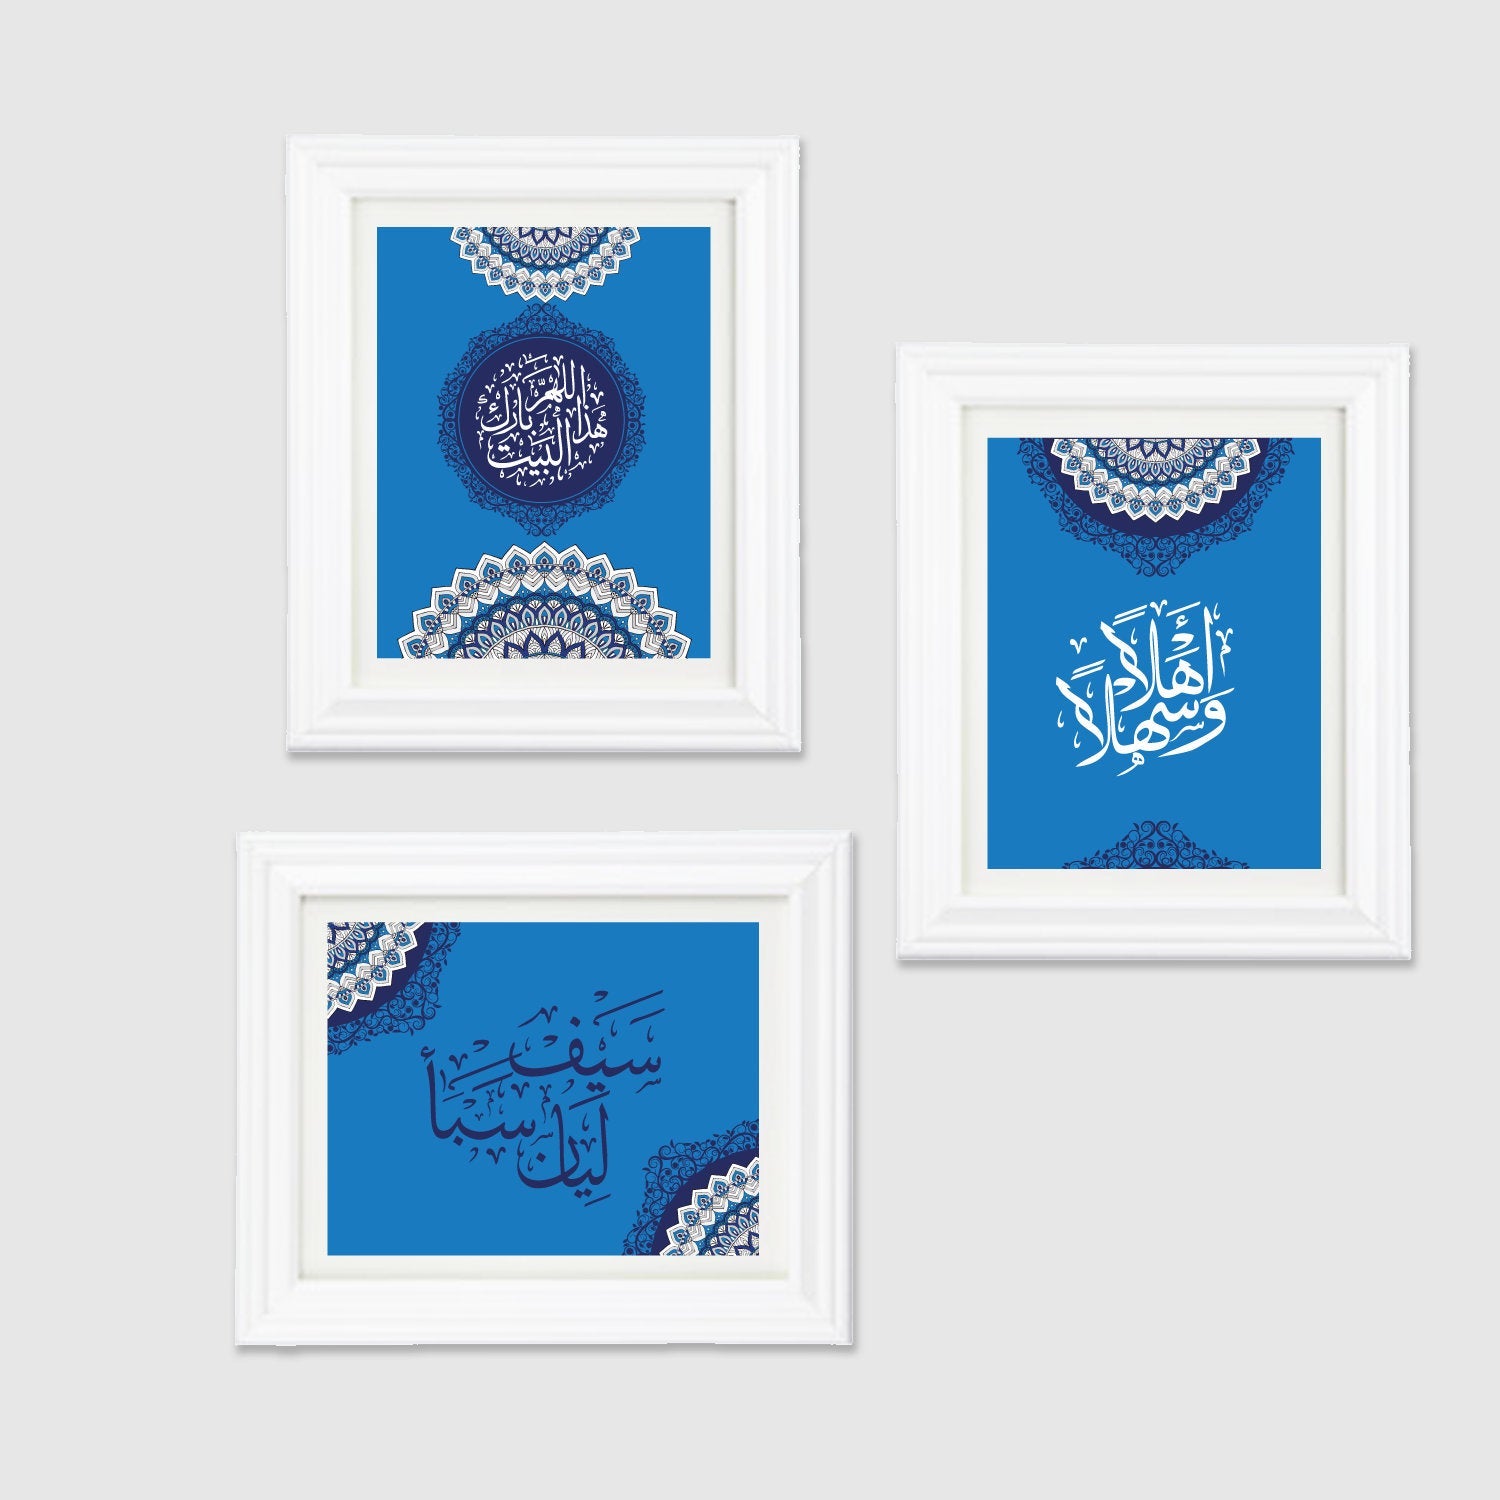 Personalized Family Members Names in Arabic Calligraphy print/poster wall art and "God Bless this house" in Arabic - 8.5"x11" set of 3